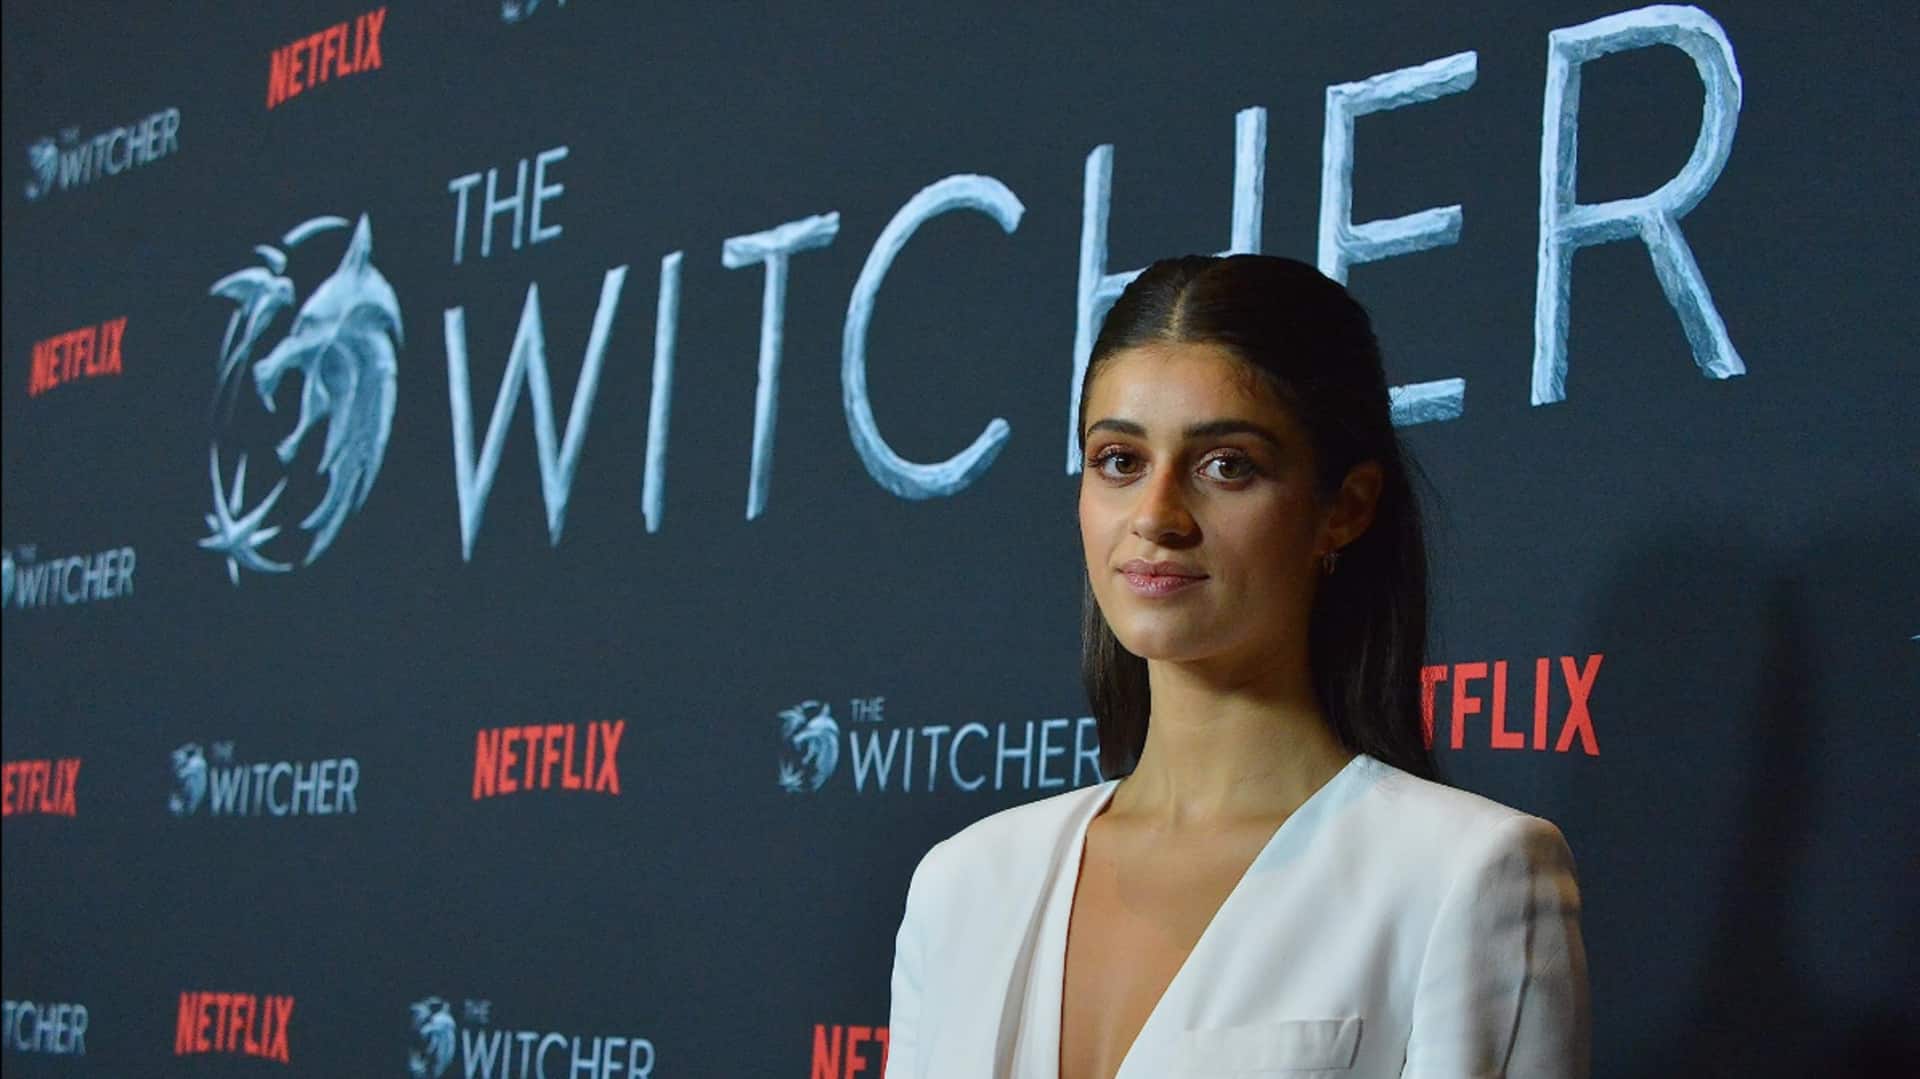 Who is Anya Chalotra? Know all about 'The Witcher' actor